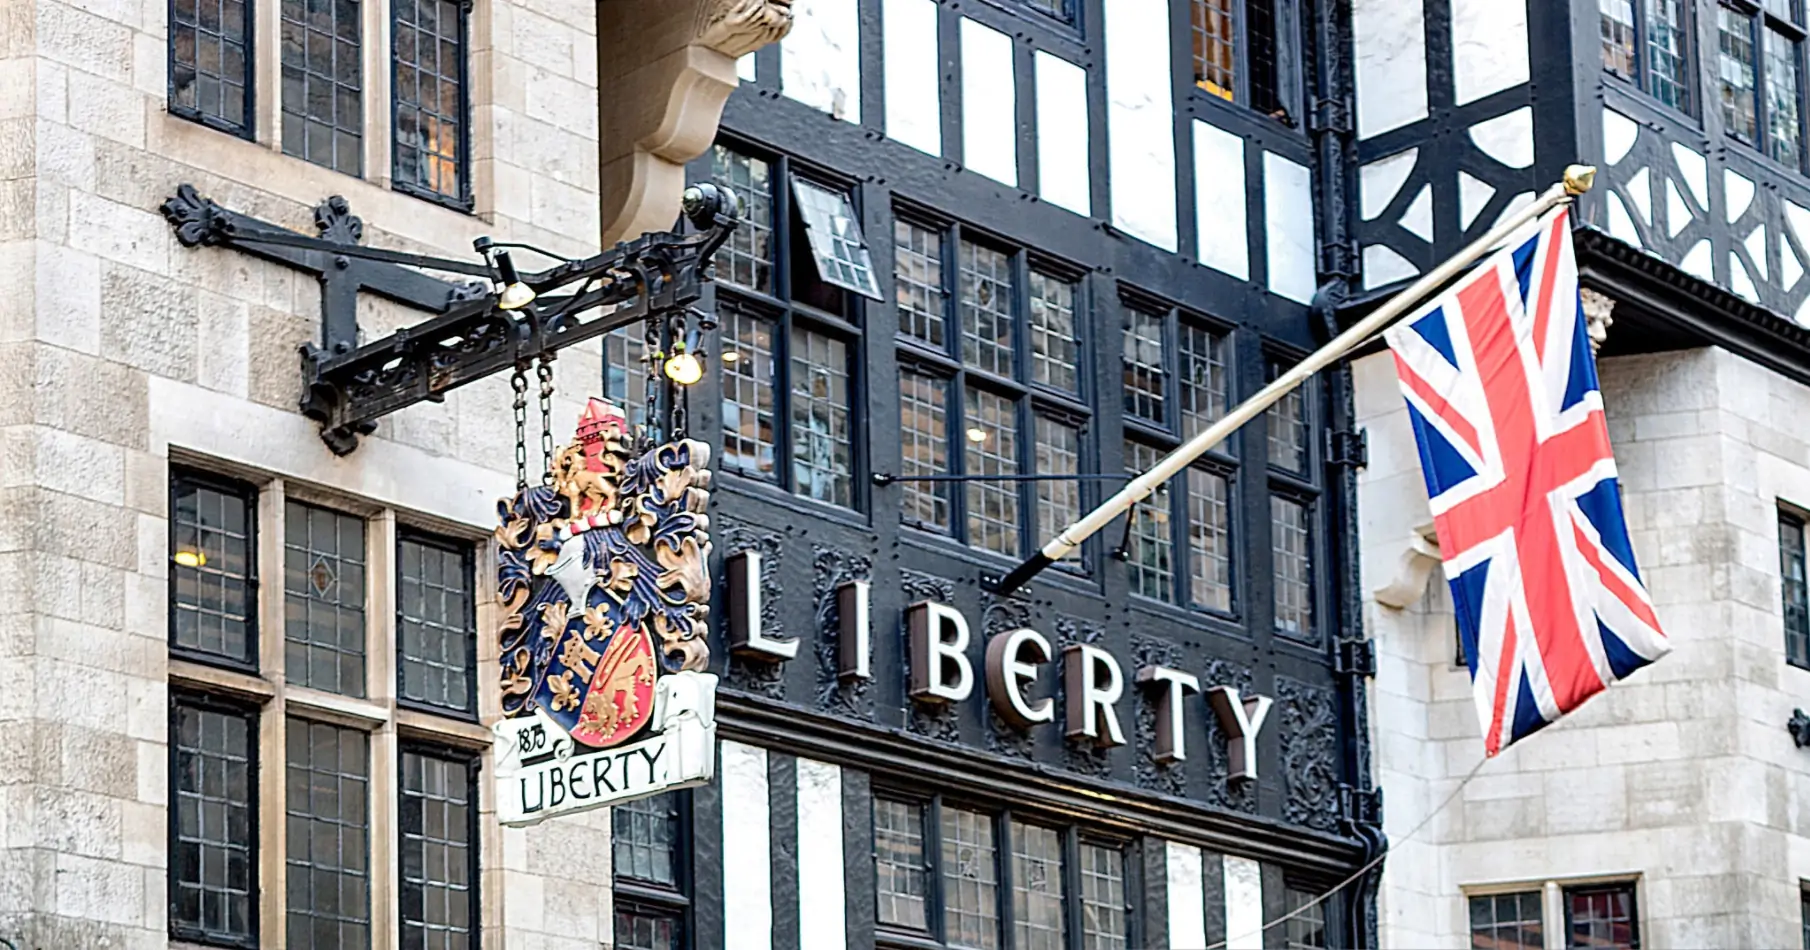 Iconic luxury shopping centre in London with a British flag flying above the store front